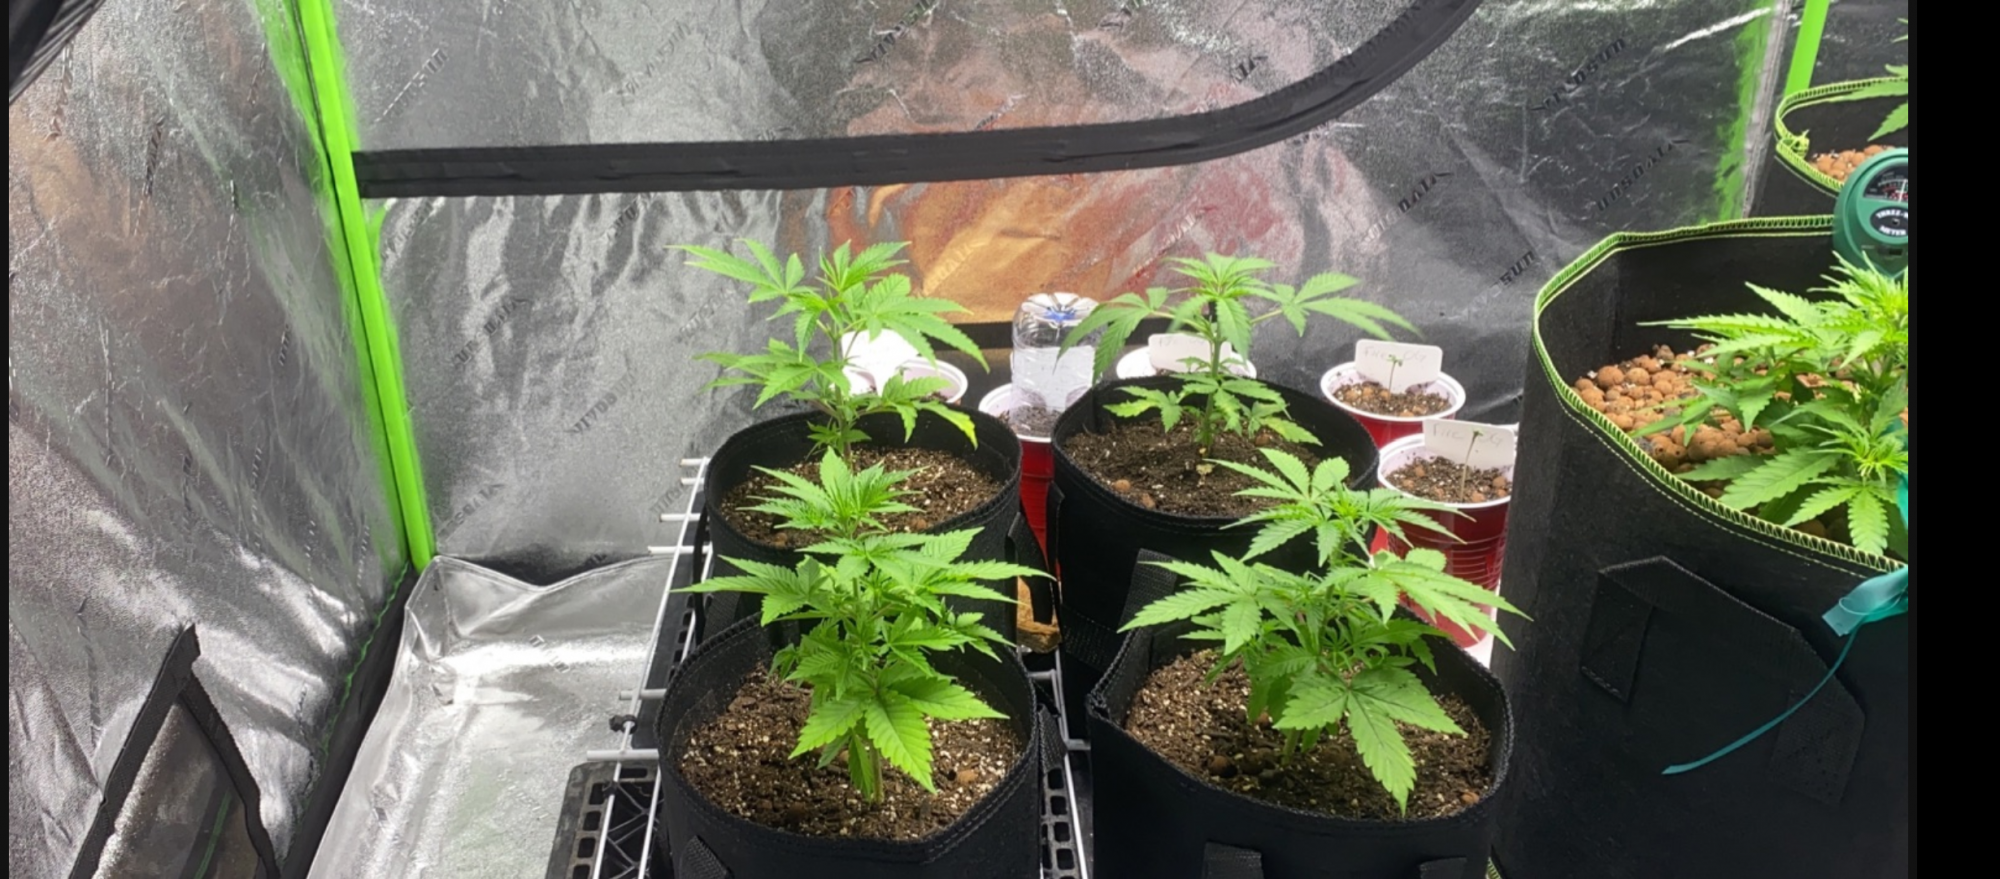 Update transplanted girls from over watered 5